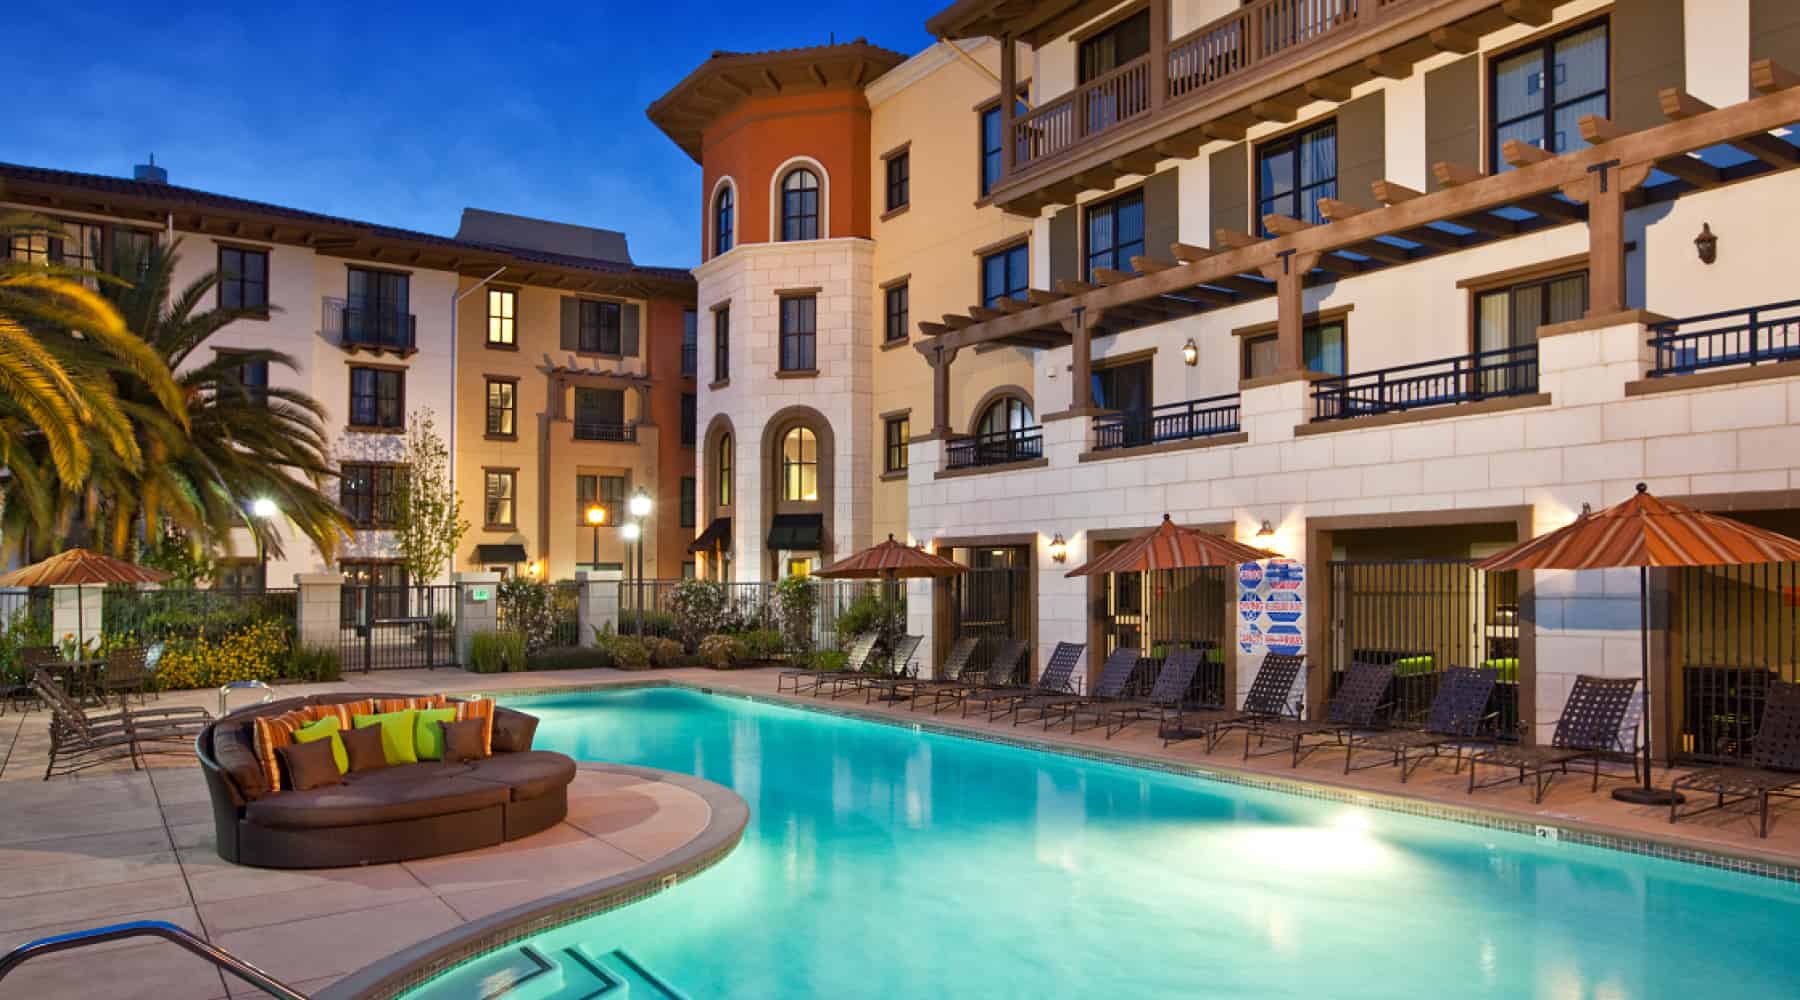 Outdoor swimming pool in a fenced area at Concorde, CA apartment community